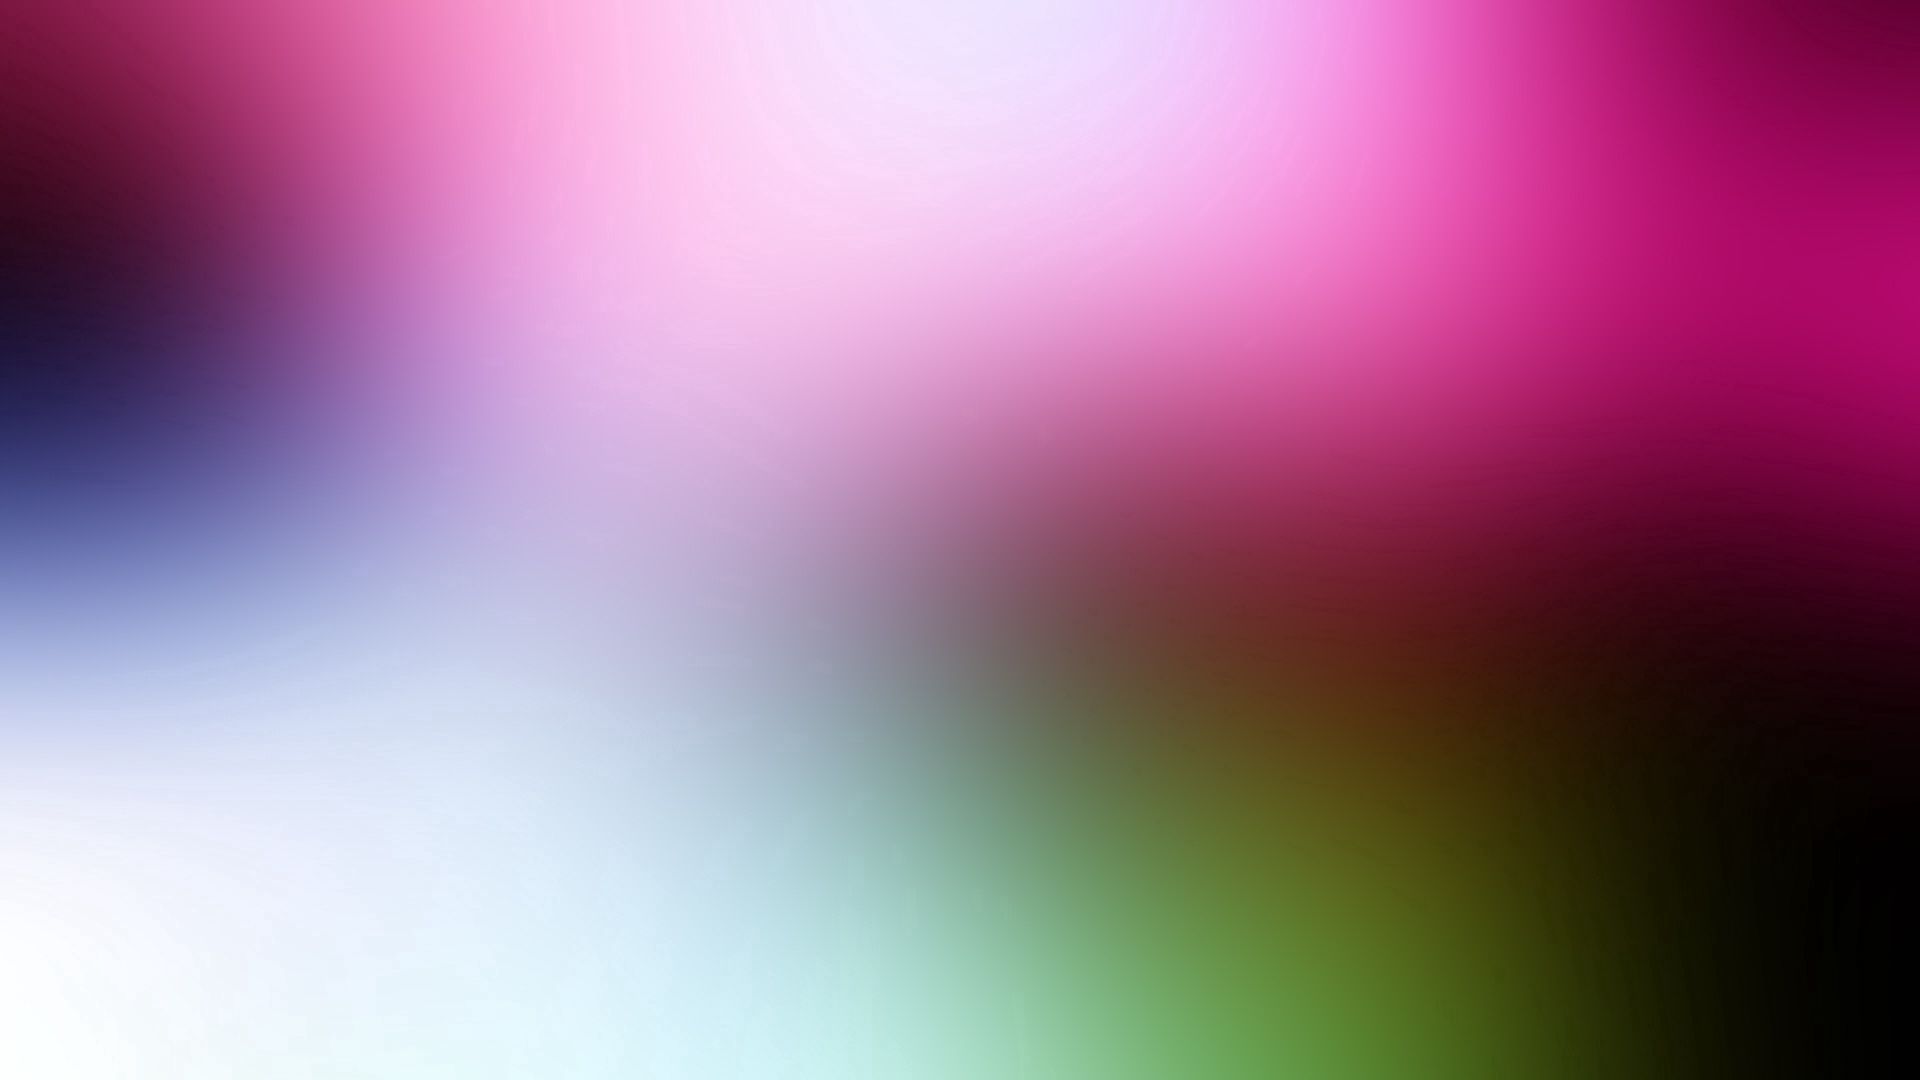 150542 free wallpaper 2160x3840 for phone, download images stains, abstract, lines, bright 2160x3840 for mobile